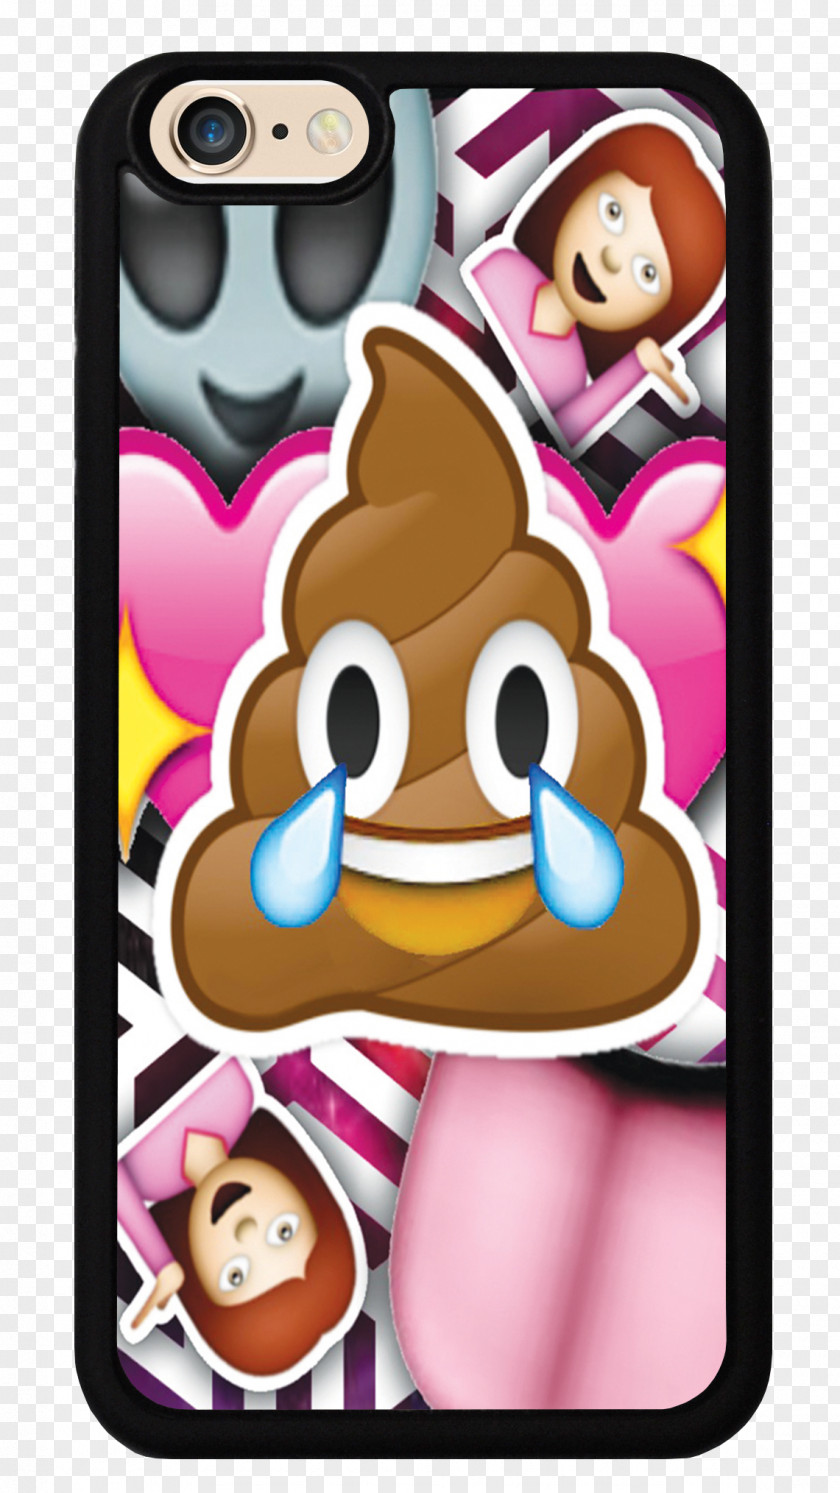 Turd Emoji Mobile Phone Accessories Animal Text Messaging Animated Cartoon Font PNG